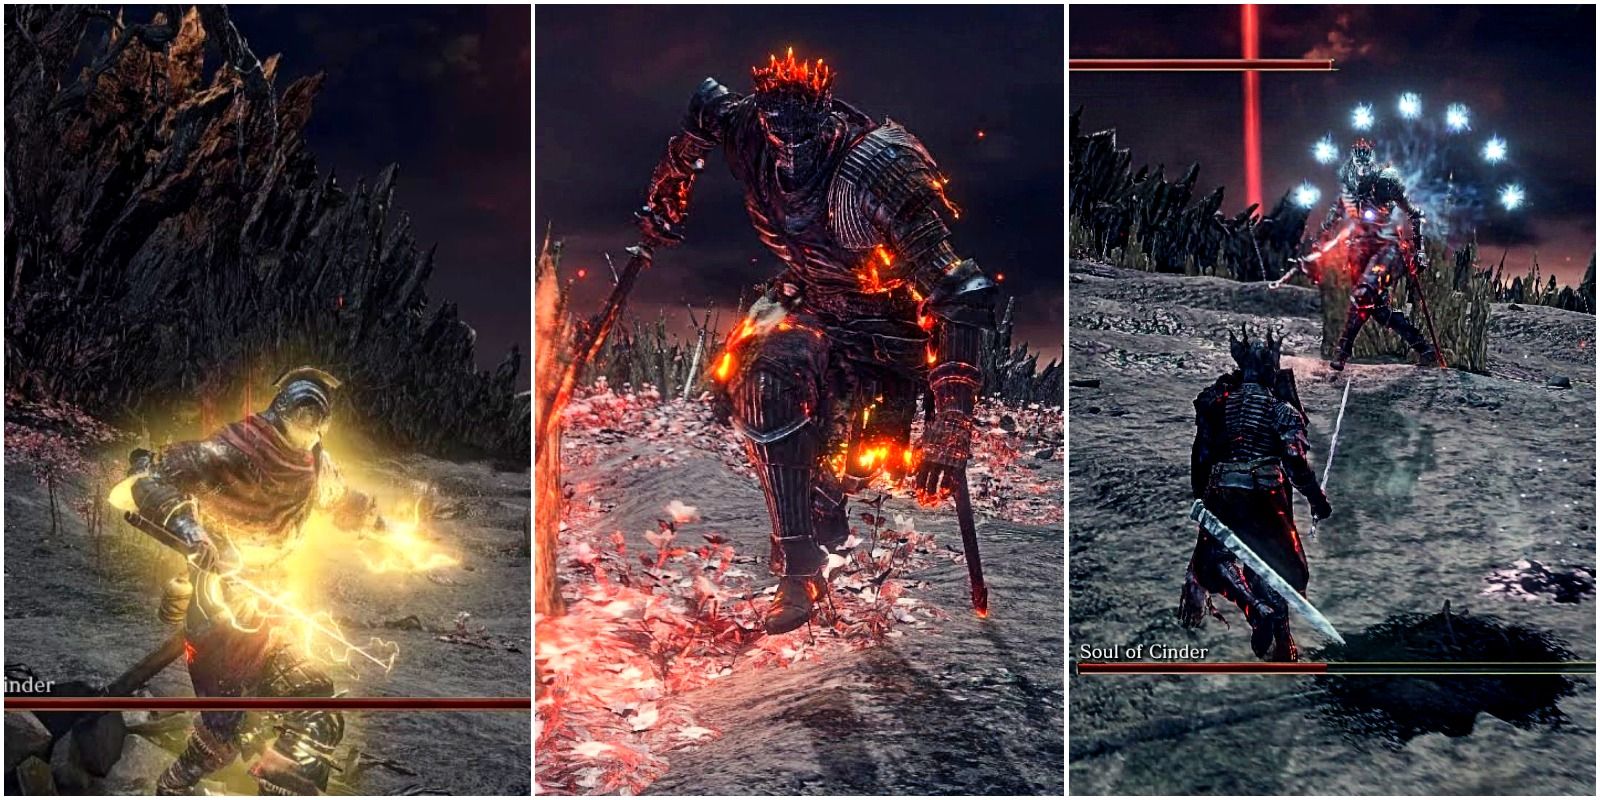 Dark Souls 3: How To Beat The Soul Of Cinder